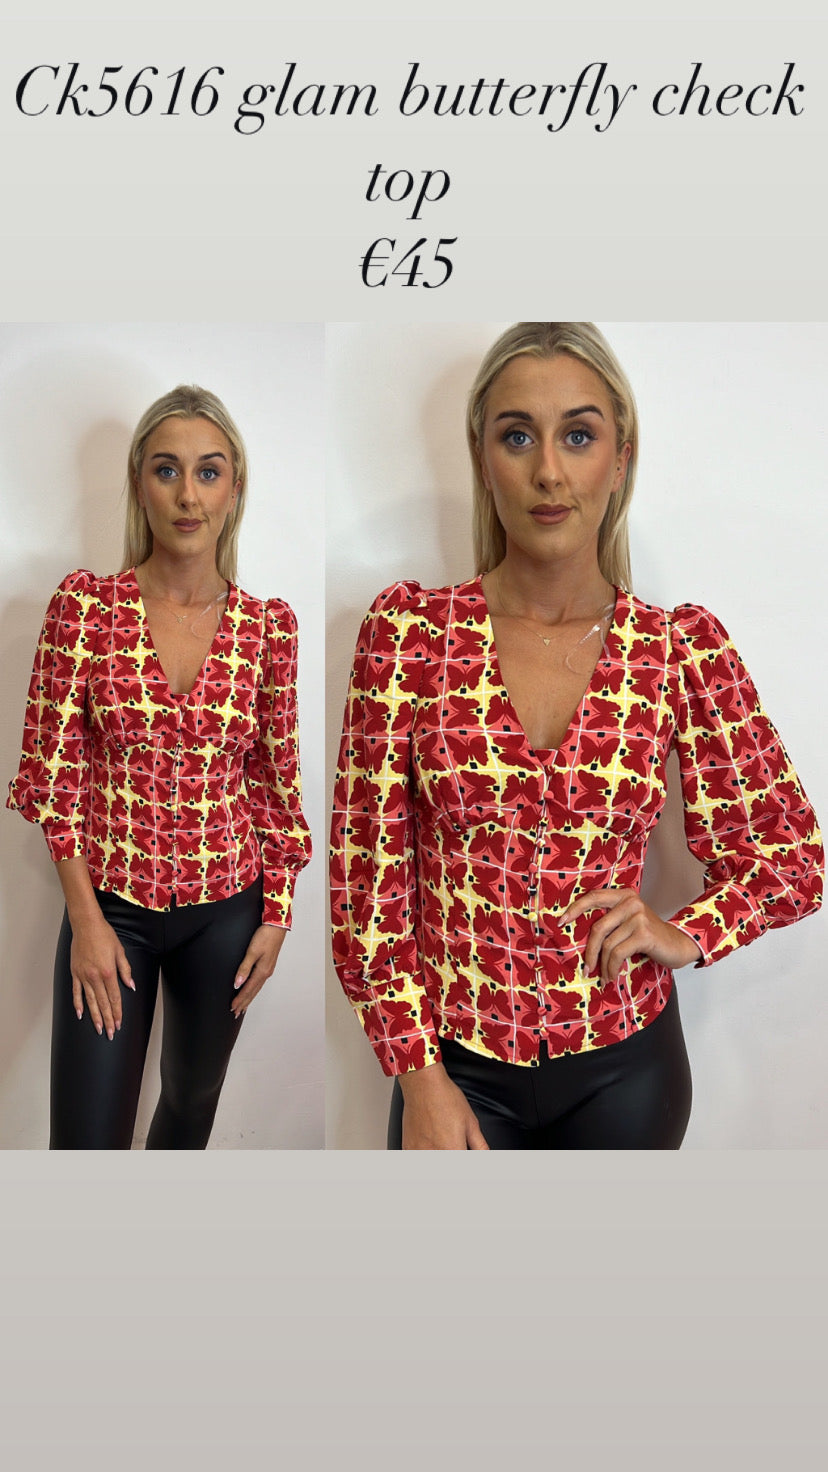 Ck5616 glam butterfly check top